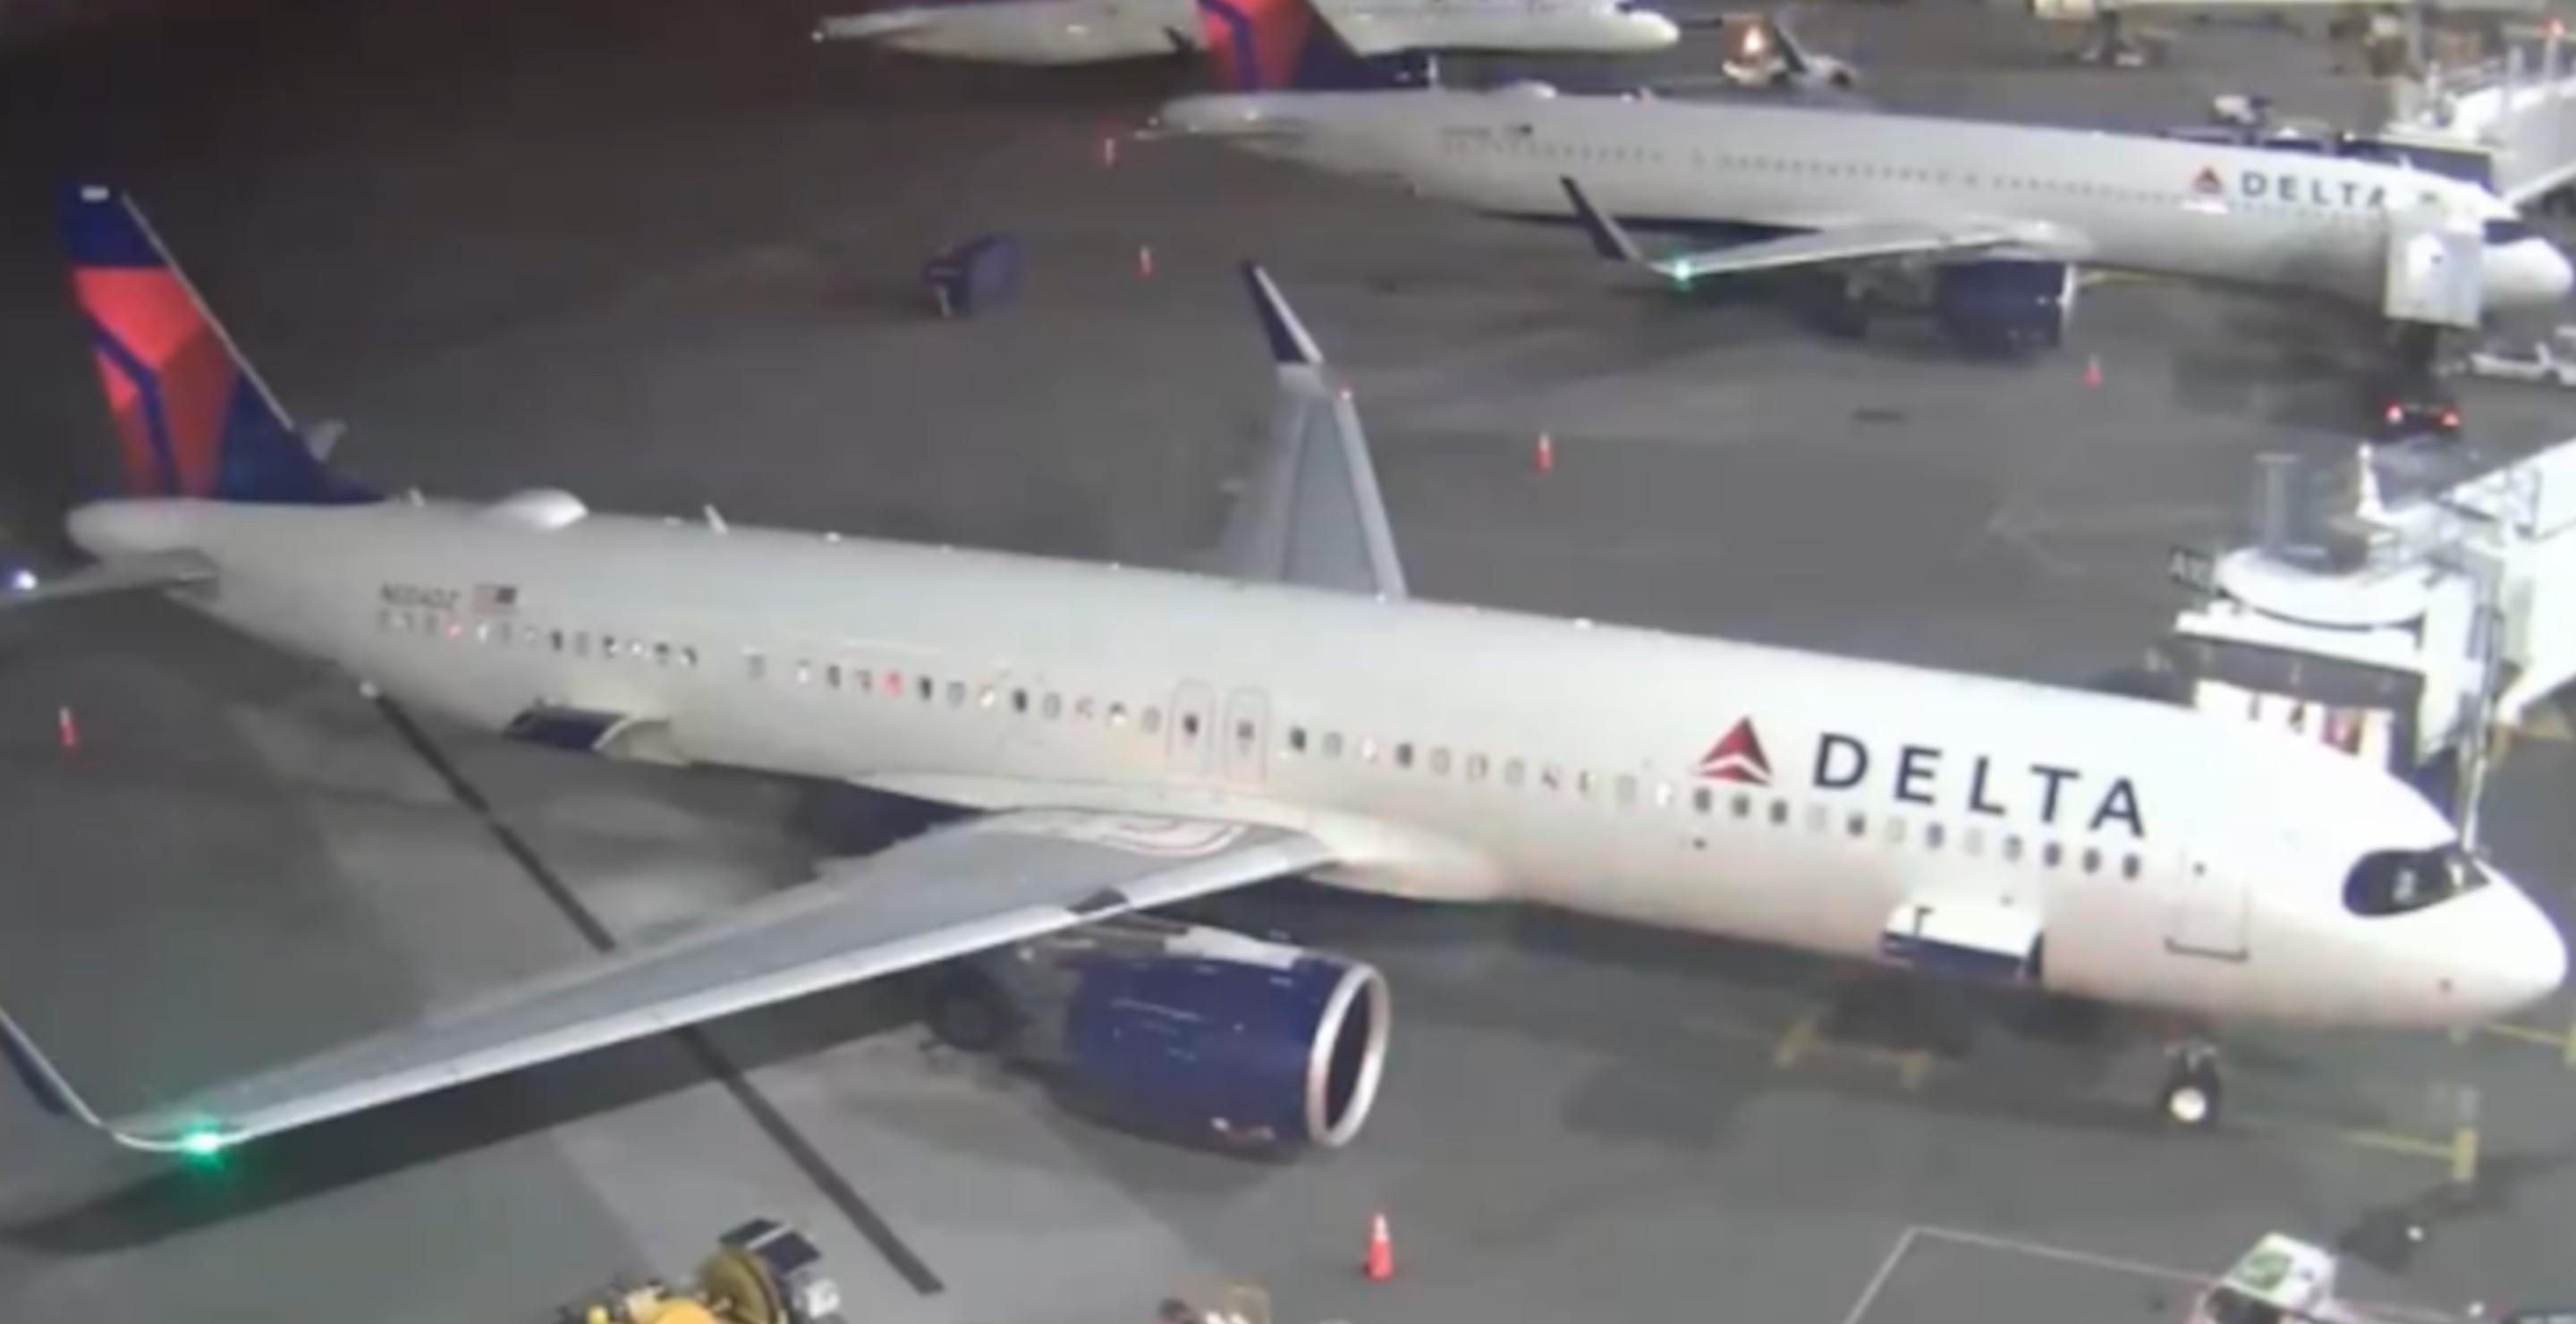 Delta Plane Evacuated After It Bursts Into Flames After Landing At Terminal